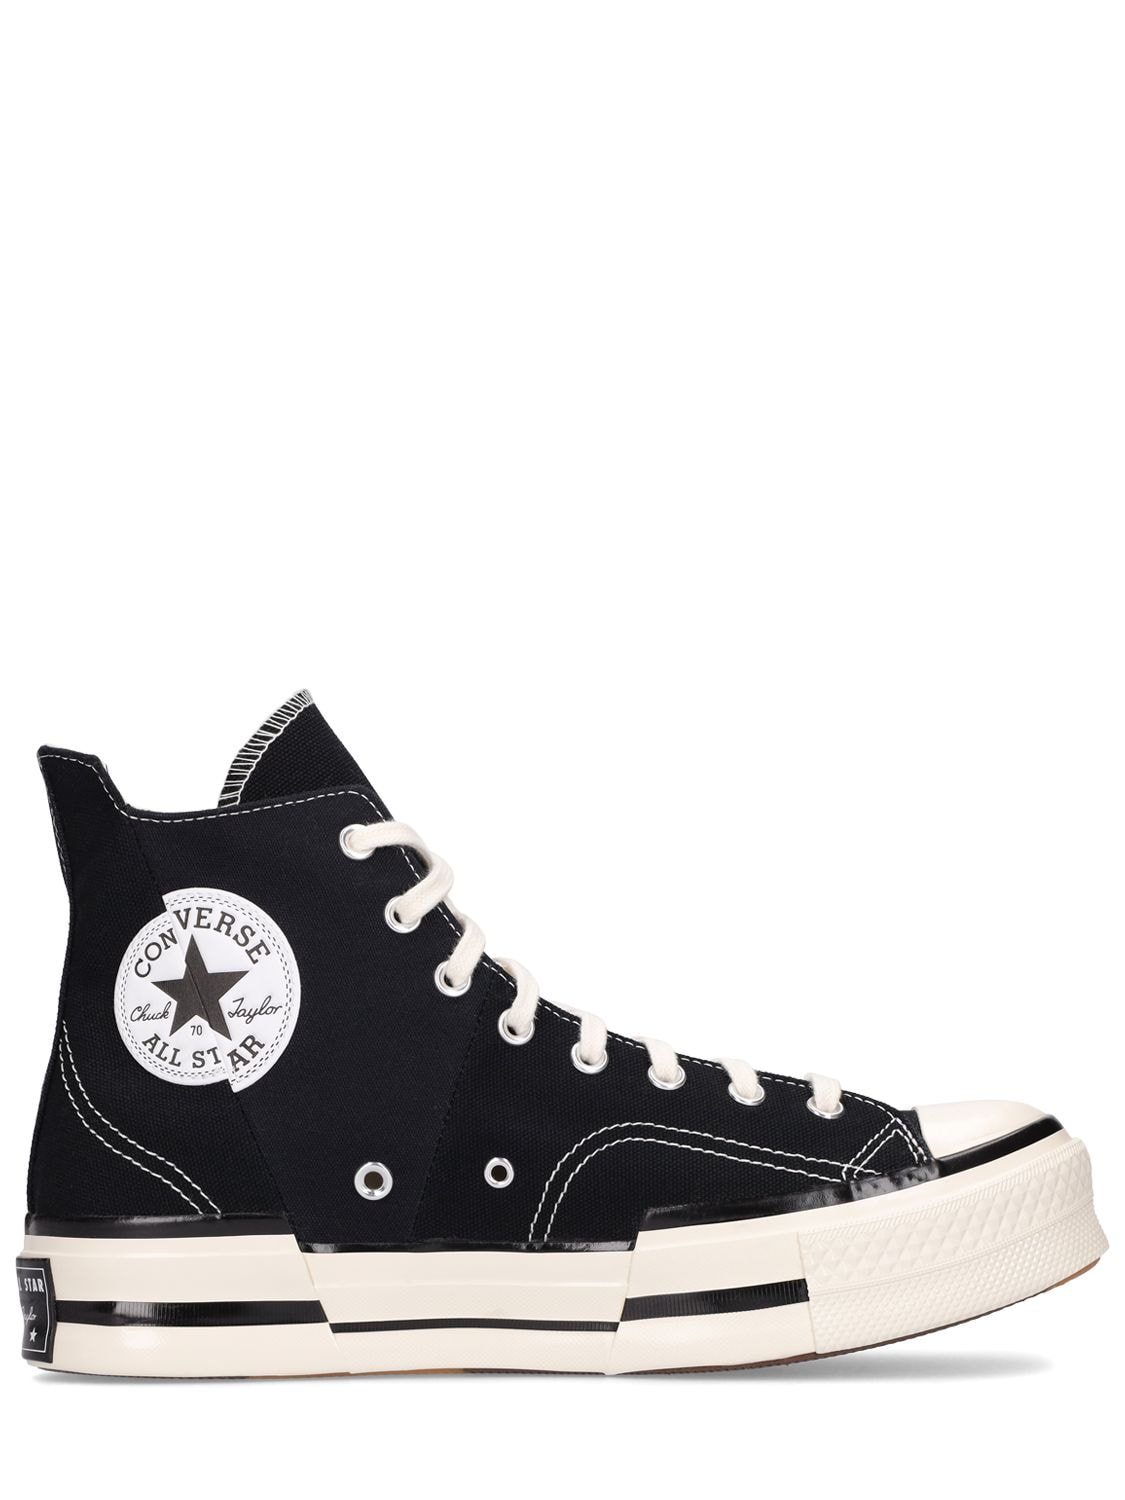 CONVERSE Chuck 70 Plus Distorted High Sneakers